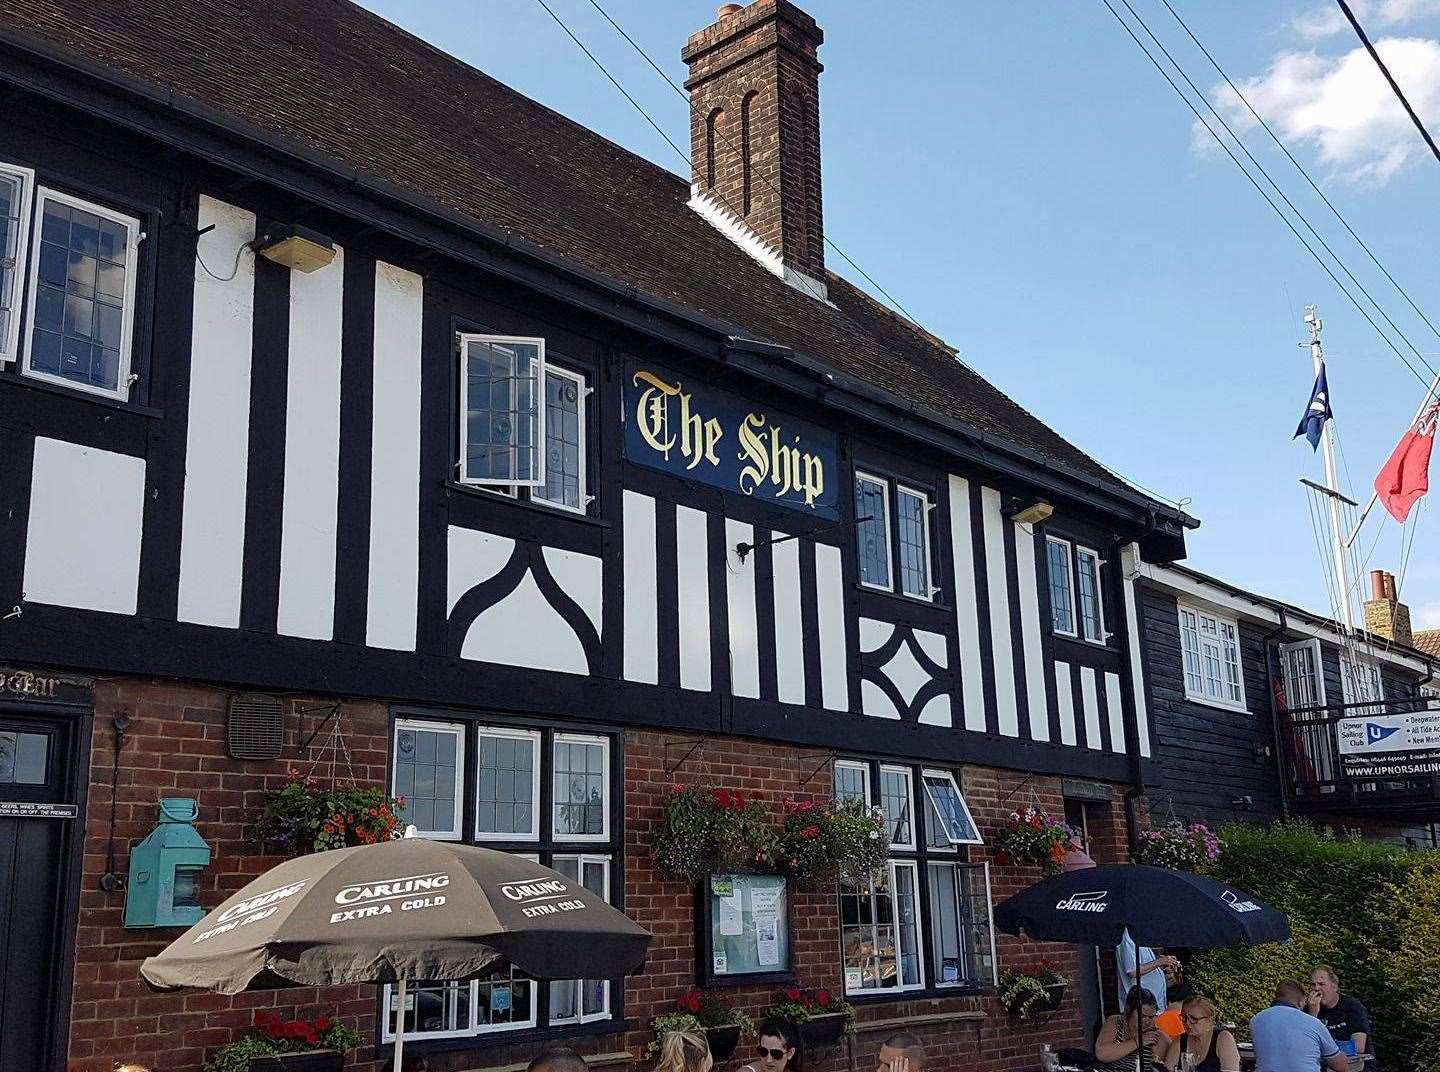 The monarch was stolen from The Ship Tavern in Lower Upnor. Picture: Sam Dack